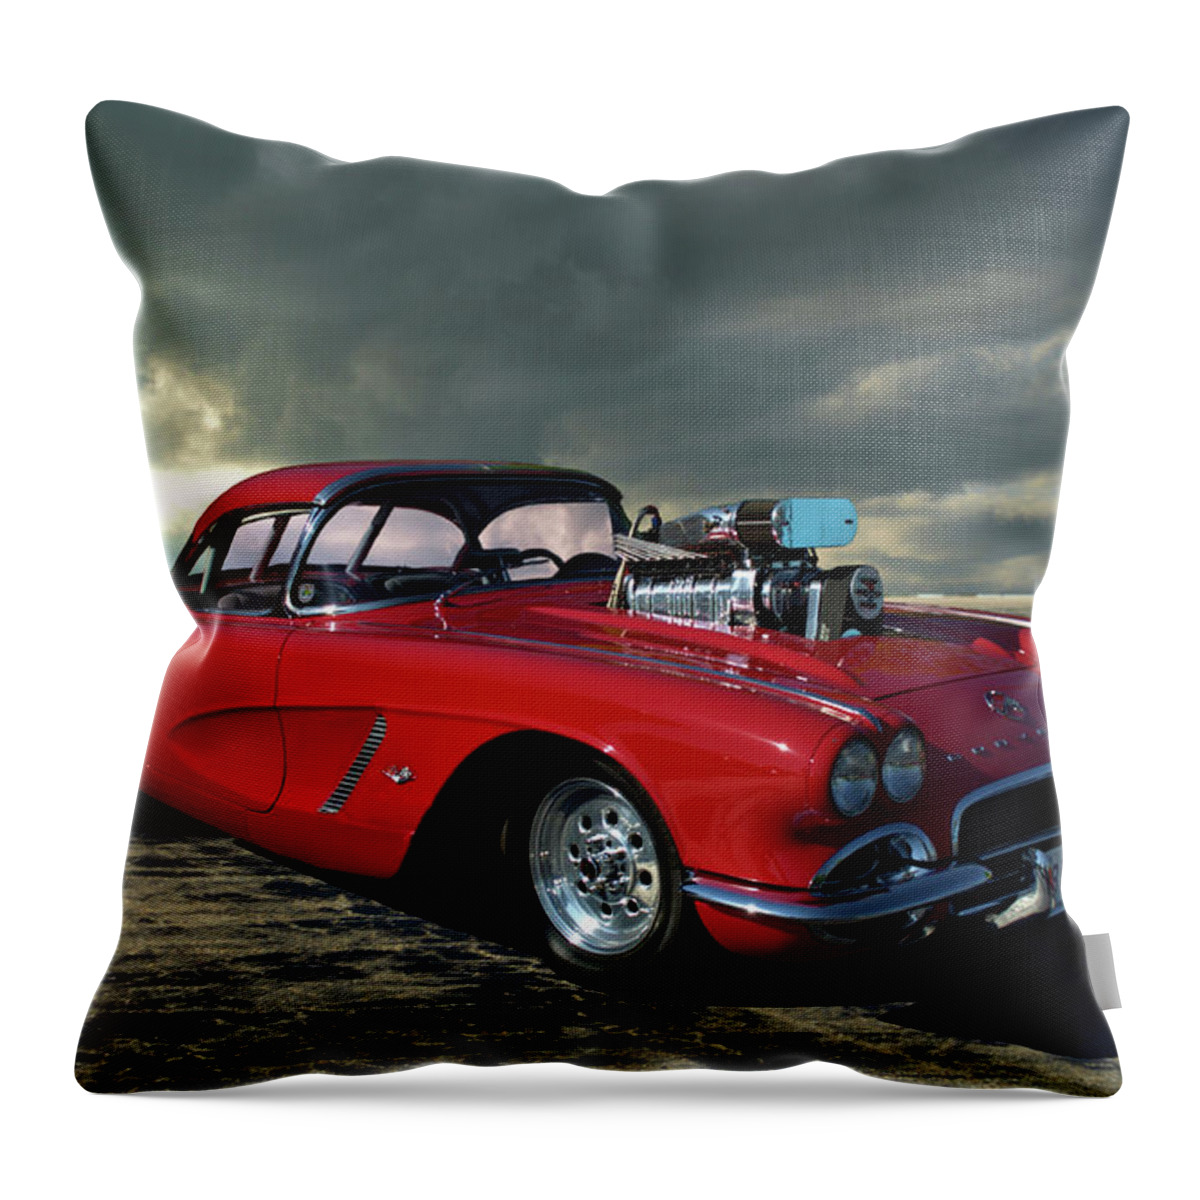 1962 Throw Pillow featuring the photograph 1962 Corvette Dragster by Tim McCullough